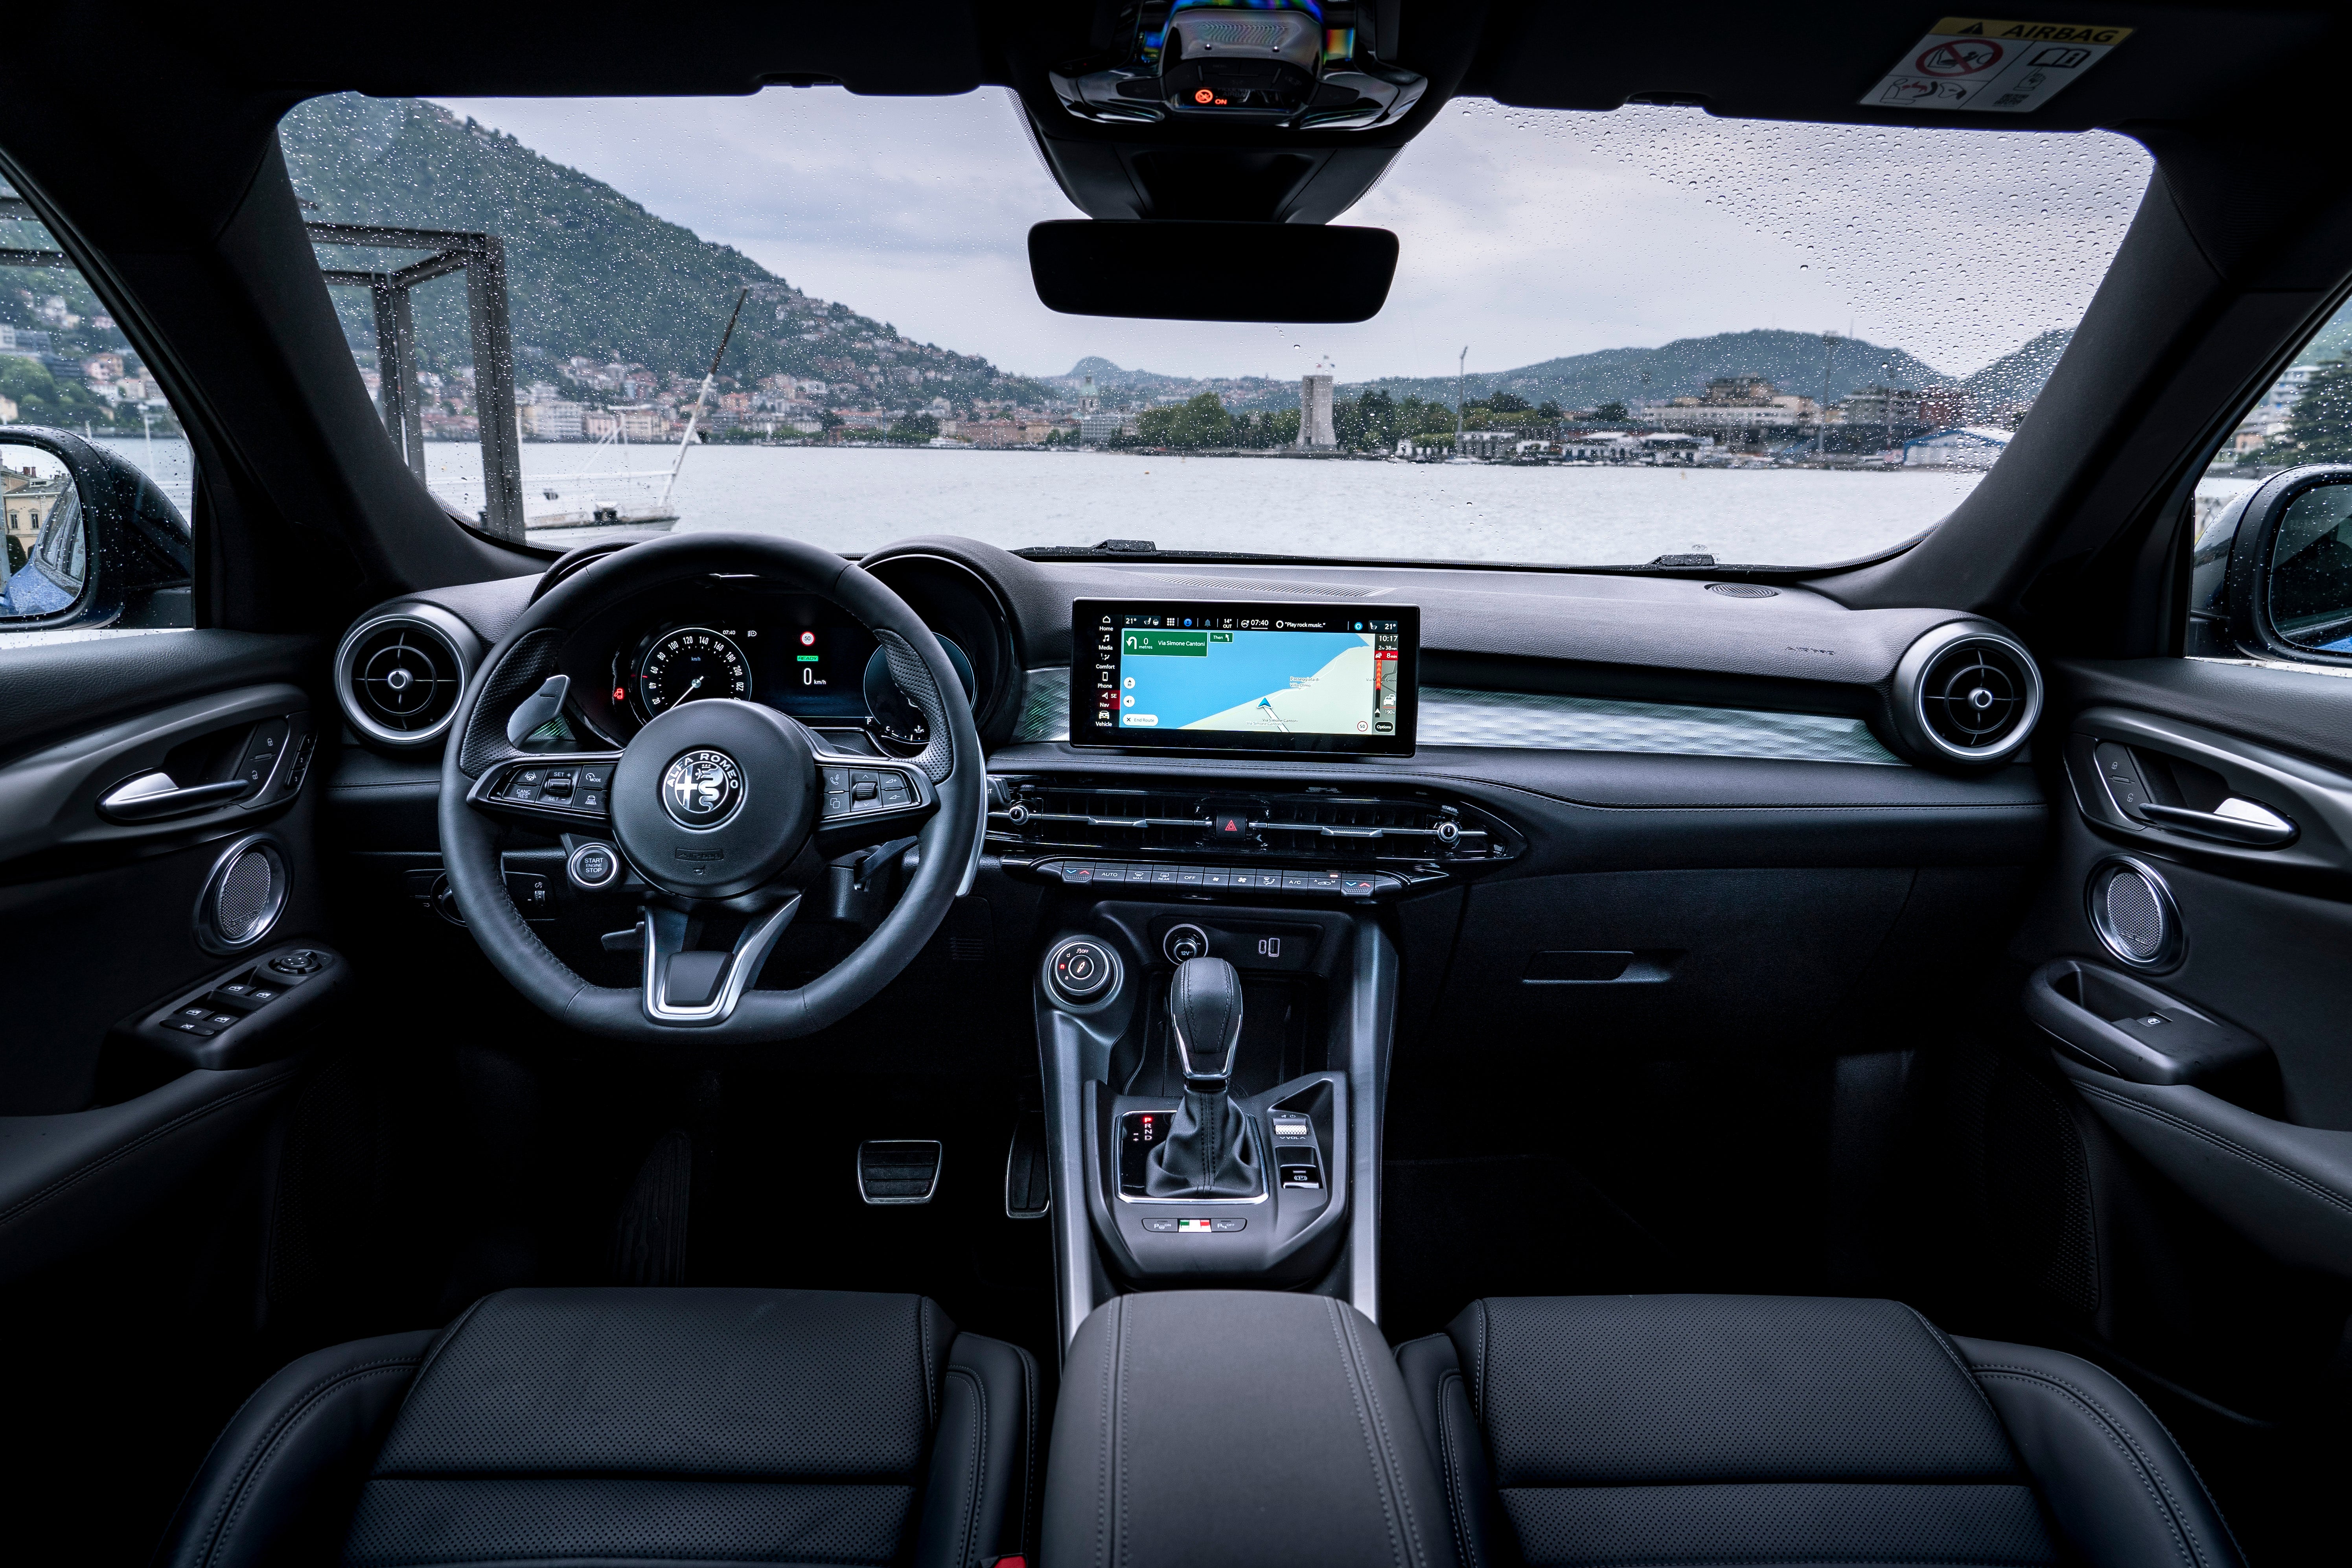 Where the Alfa scores highly is the interior ambience